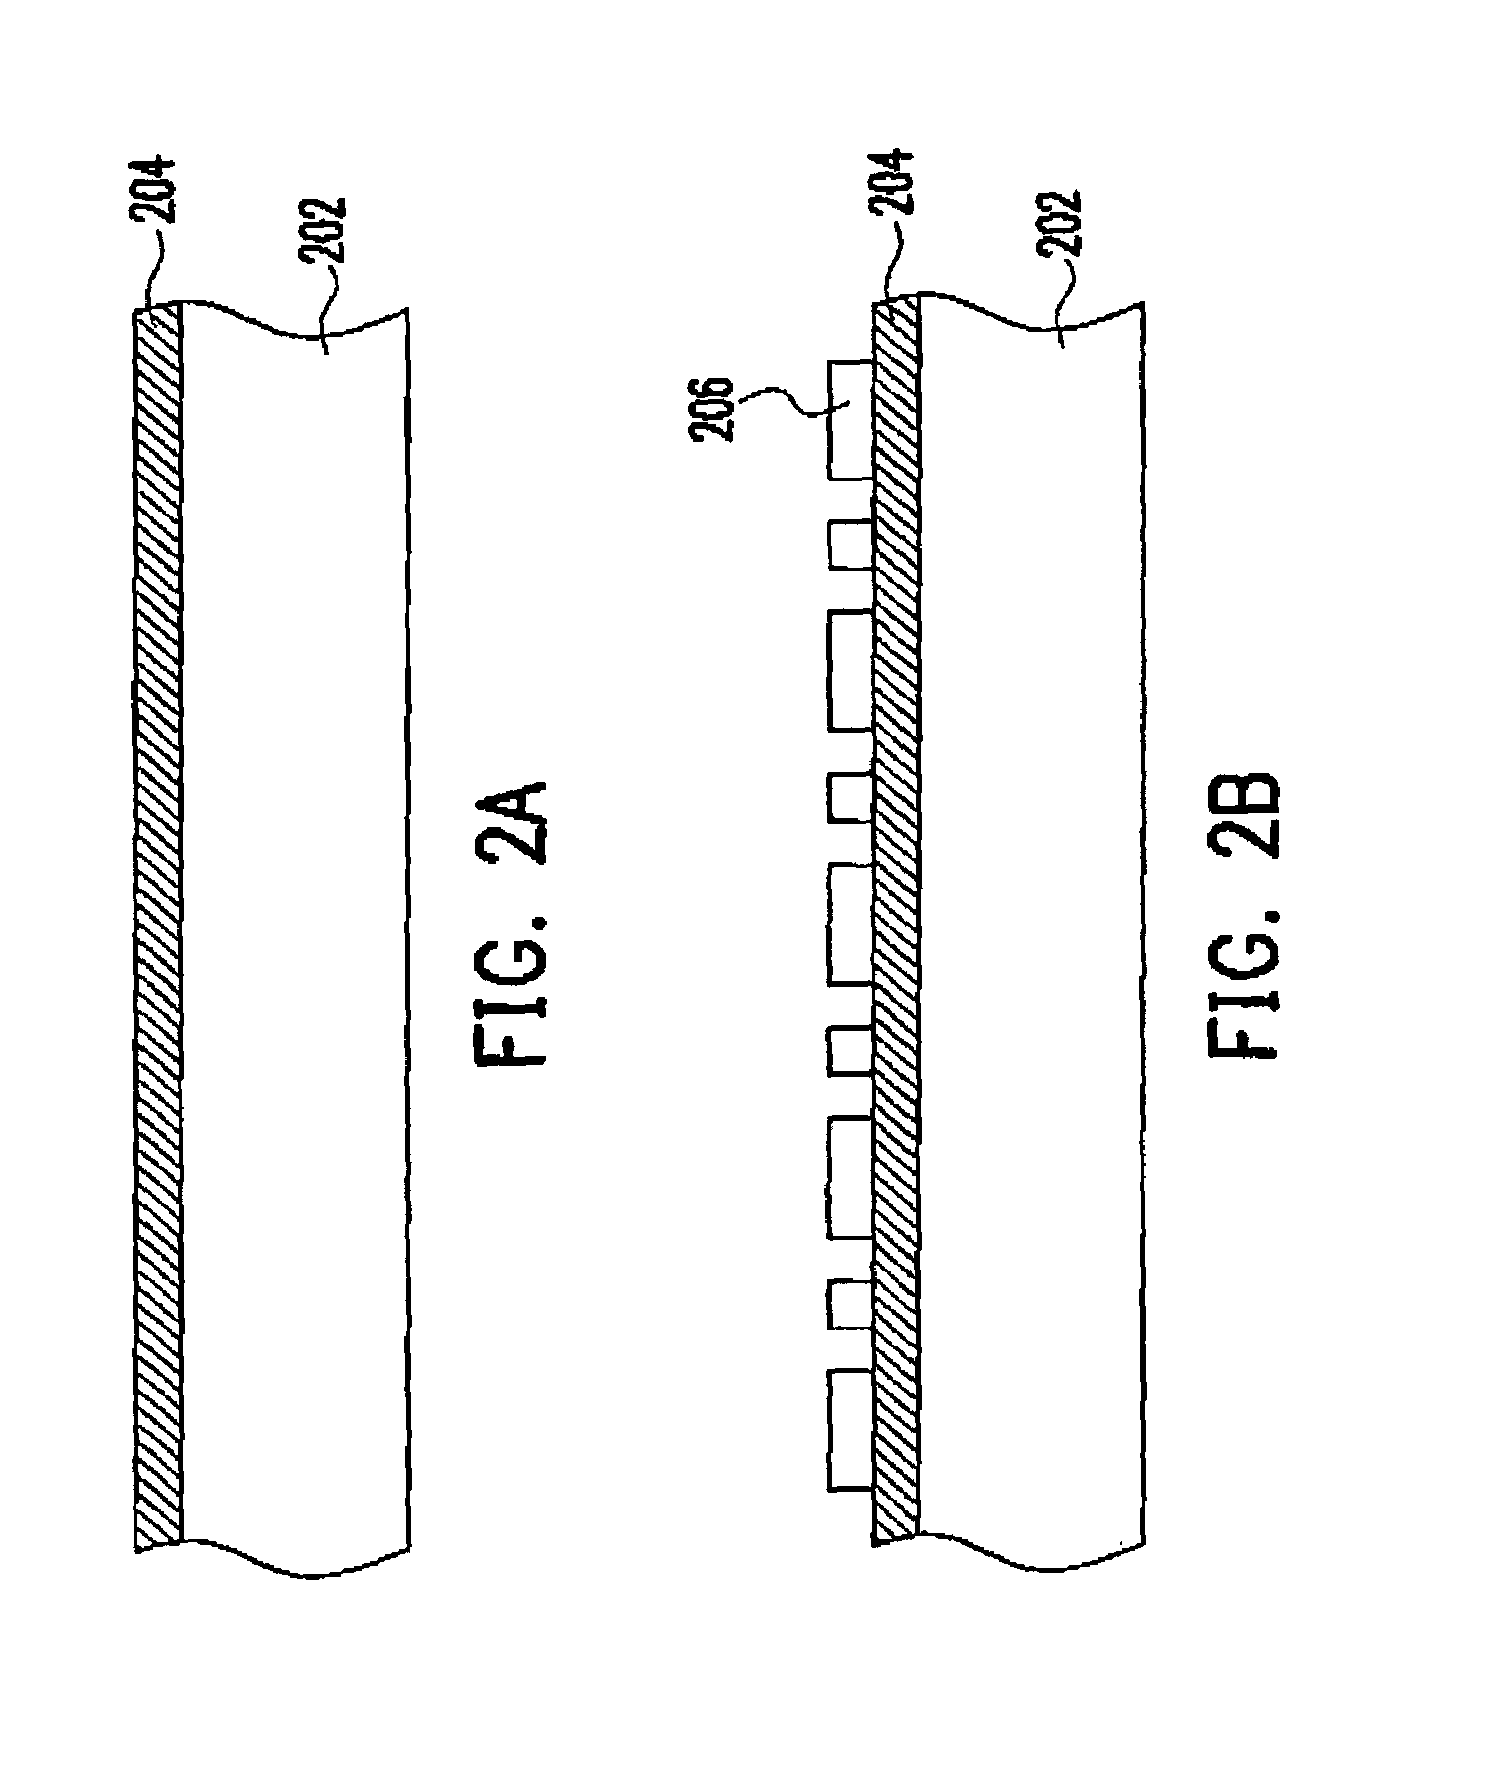 High density laminated substrate structure and manufacture method thereof